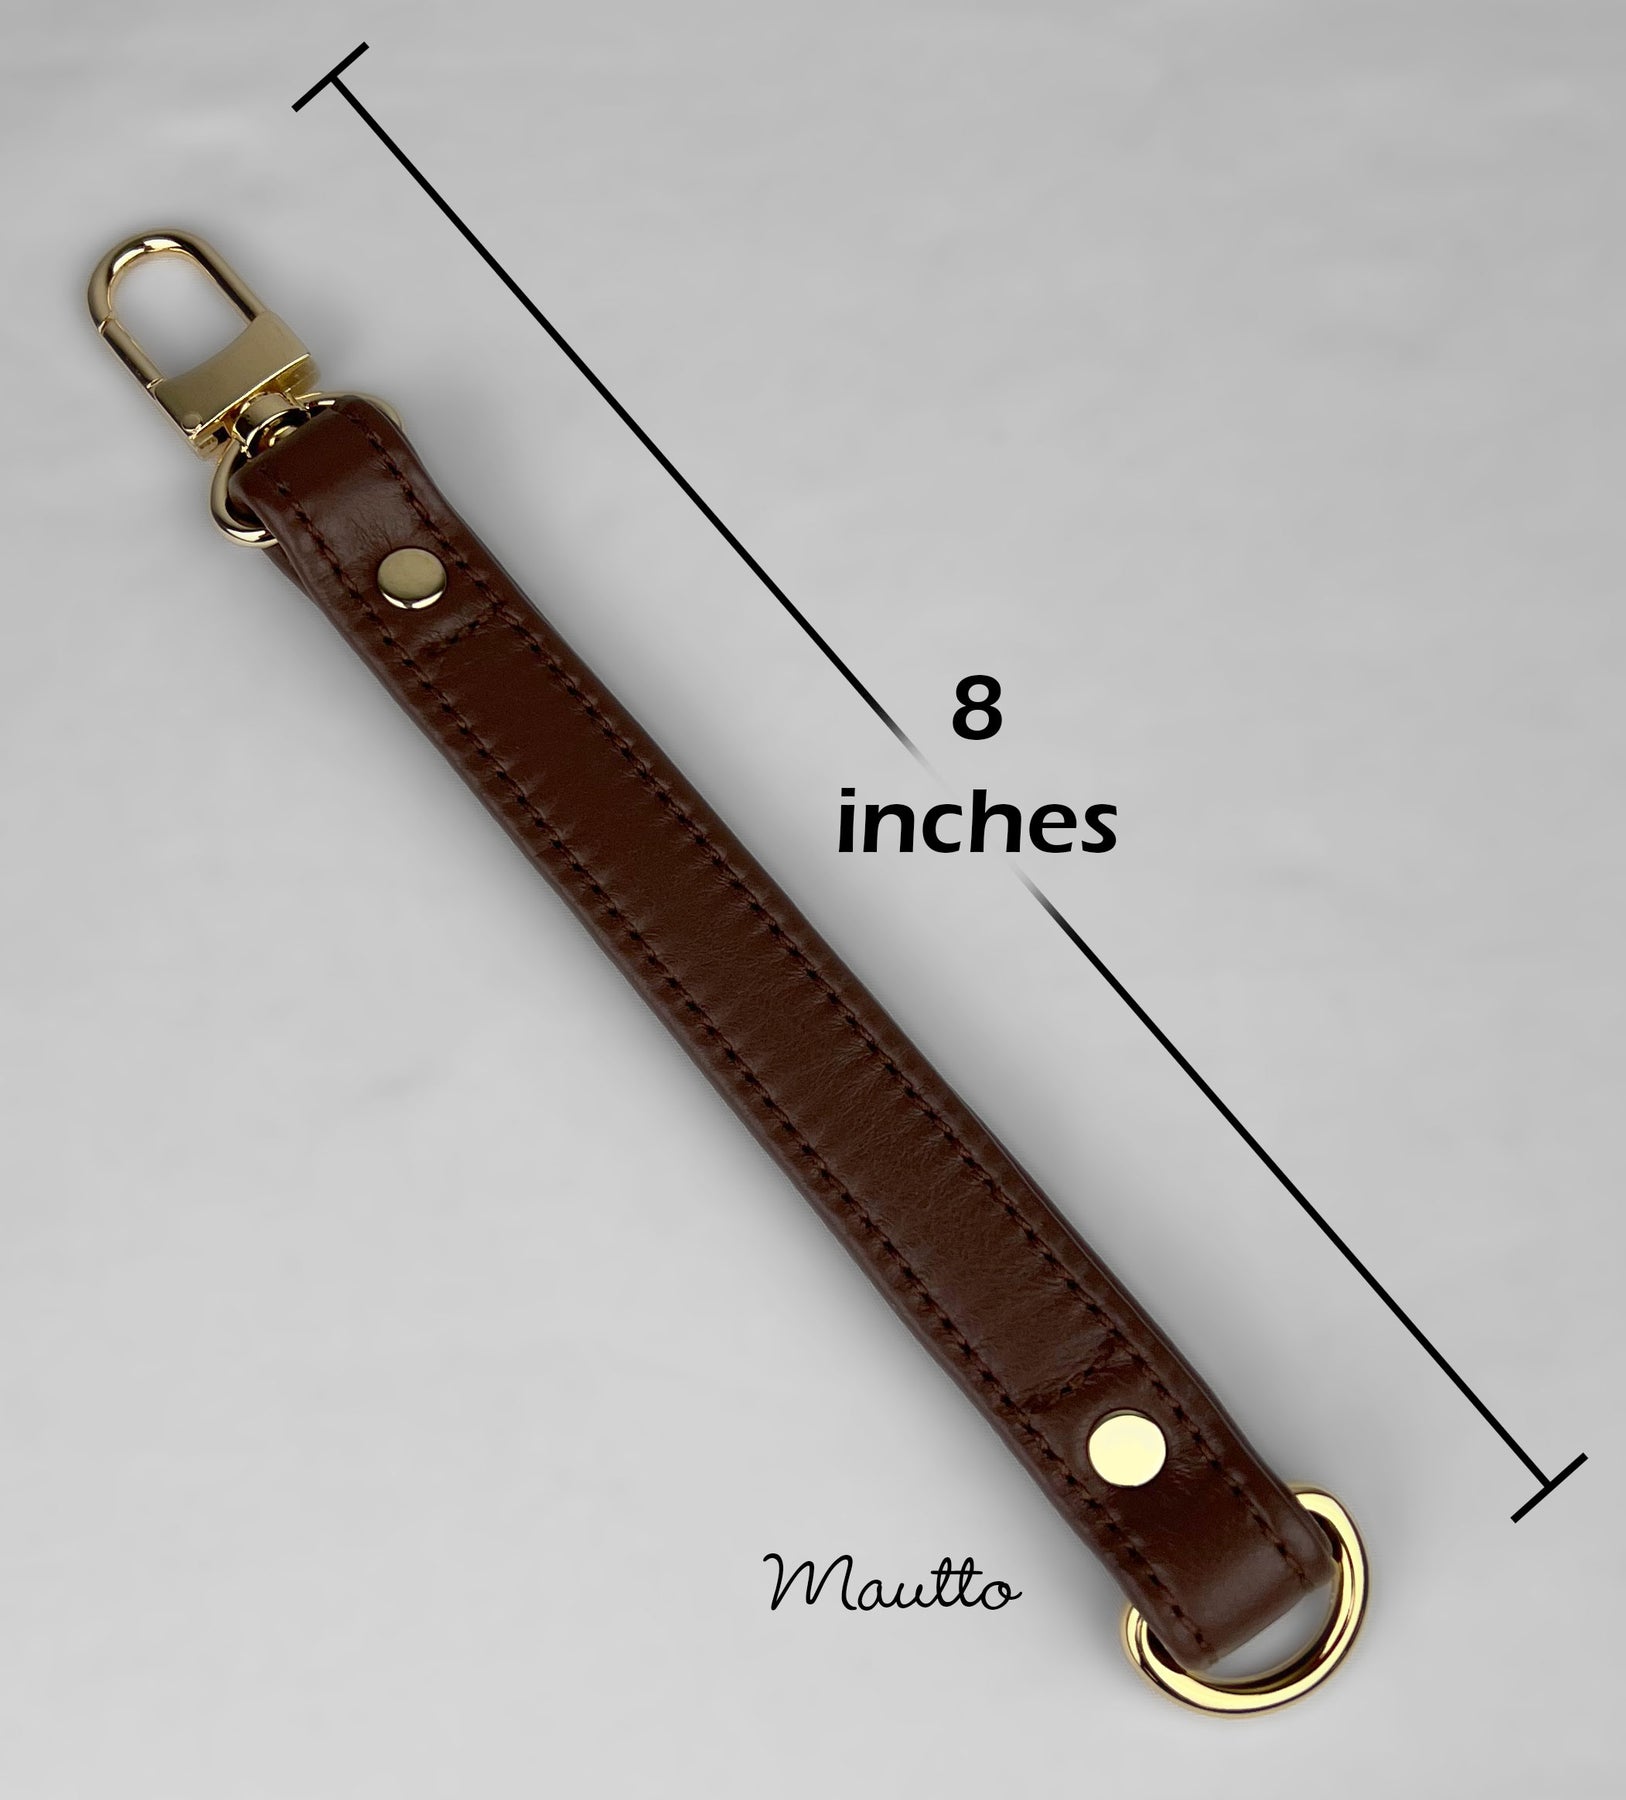 Adjustable Extender for Purse Strap, Extension Bag Strap, Vegan Leather Purse  Strap Extender, Additional Strap for Bags and Purses to Extend 